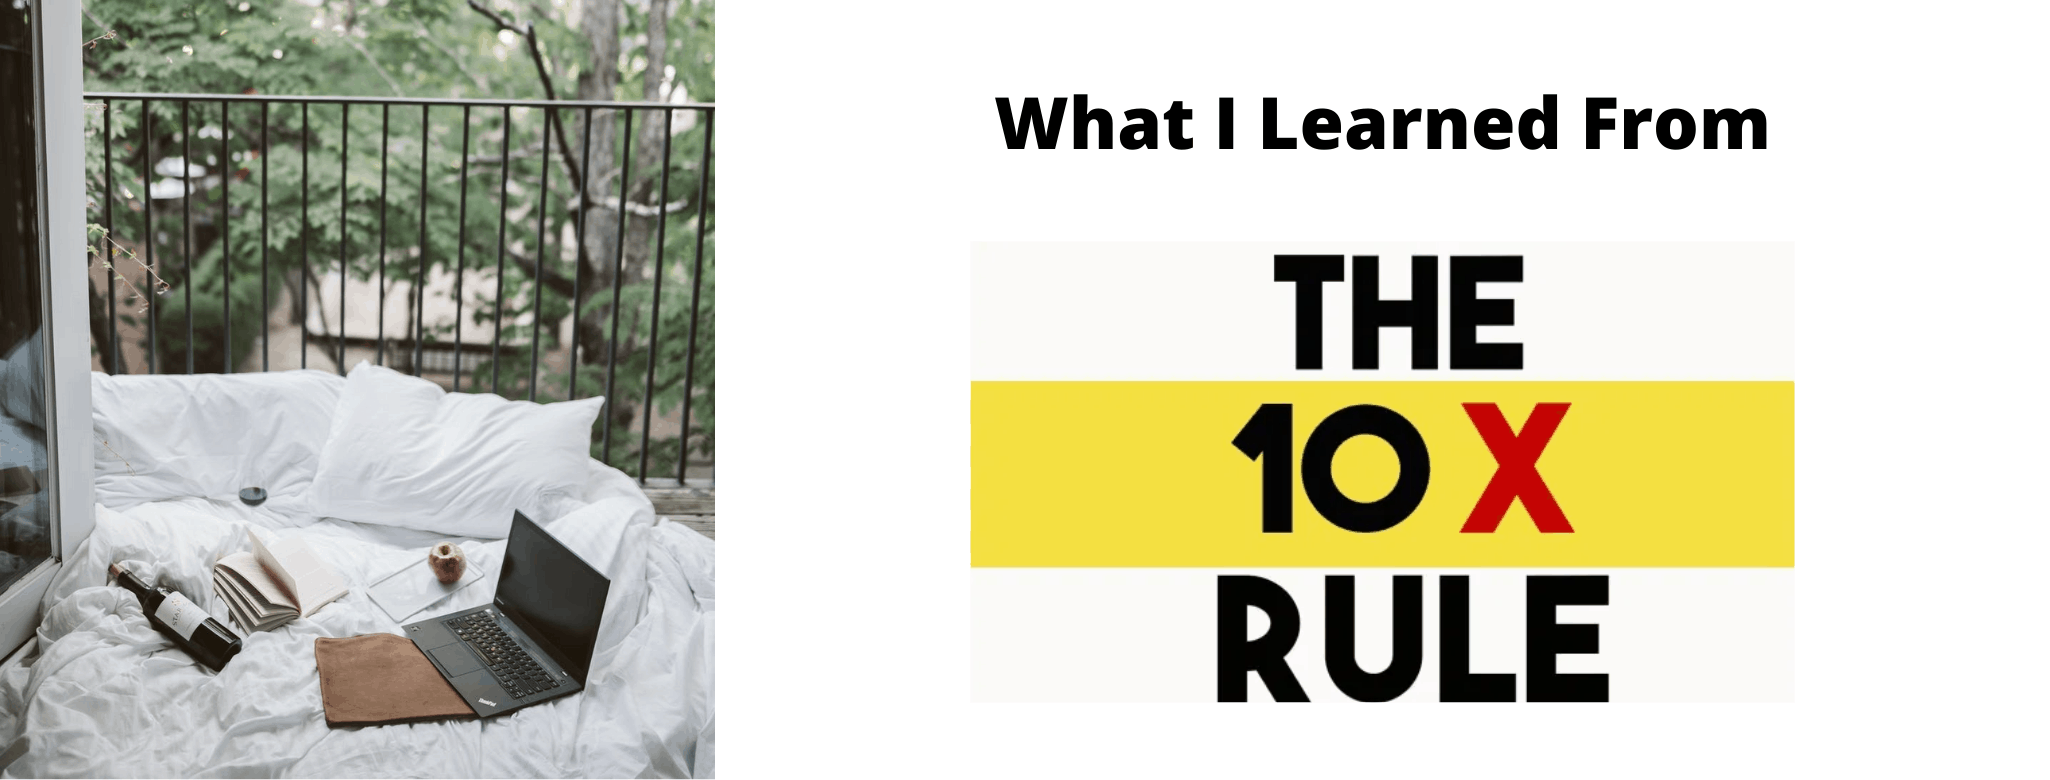 the 10x rule by grant cardone